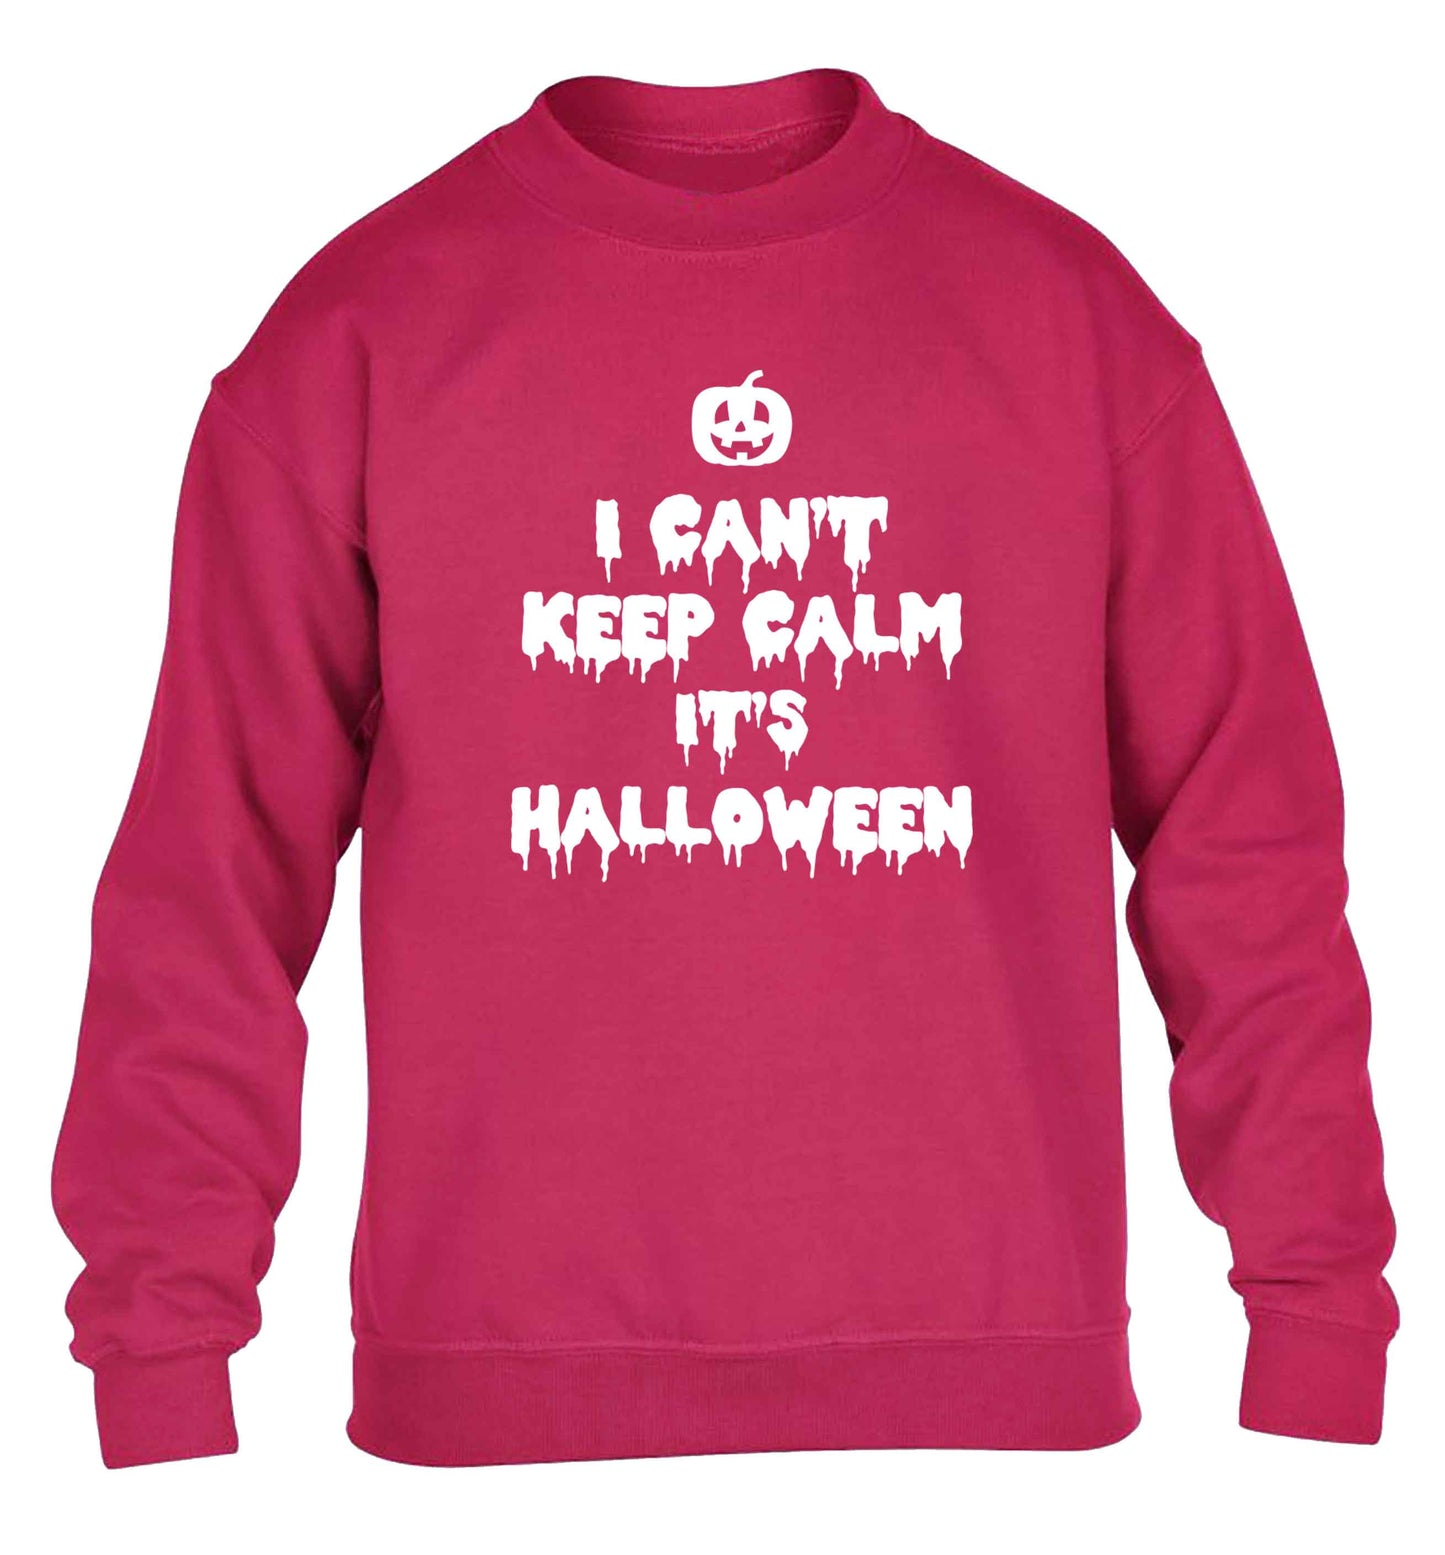 I can't keep calm it's halloween children's pink sweater 12-13 Years